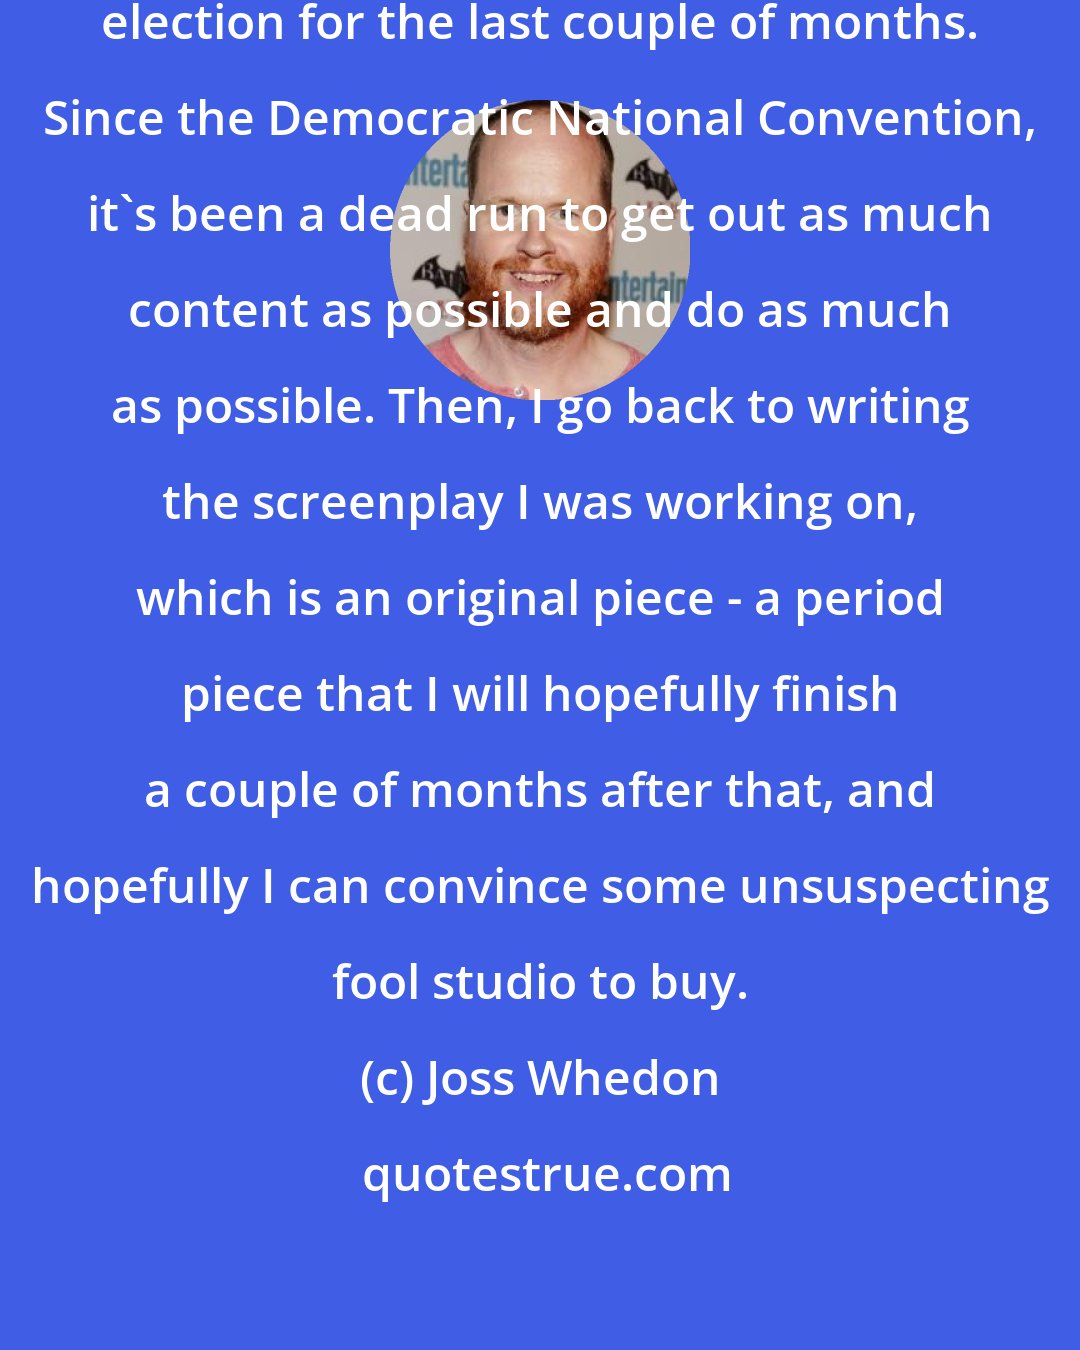 Joss Whedon: Everything has been for the [President] election for the last couple of months. Since the Democratic National Convention, it's been a dead run to get out as much content as possible and do as much as possible. Then, I go back to writing the screenplay I was working on, which is an original piece - a period piece that I will hopefully finish a couple of months after that, and hopefully I can convince some unsuspecting fool studio to buy.